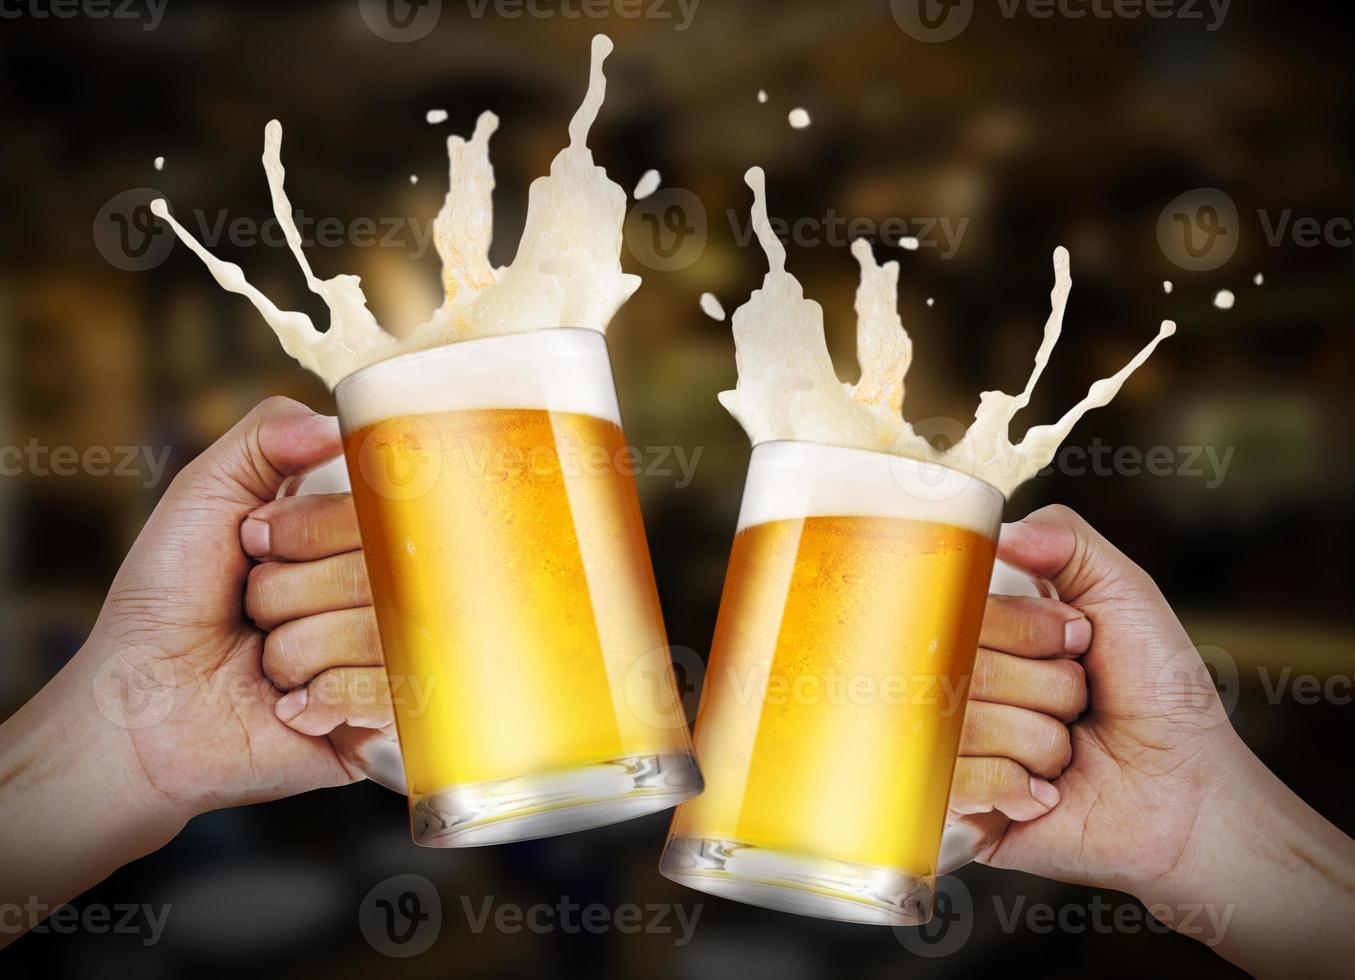 Two hands holding a glasses of light beer toasting with bubble froth splash in the restaurant background with copy space photo